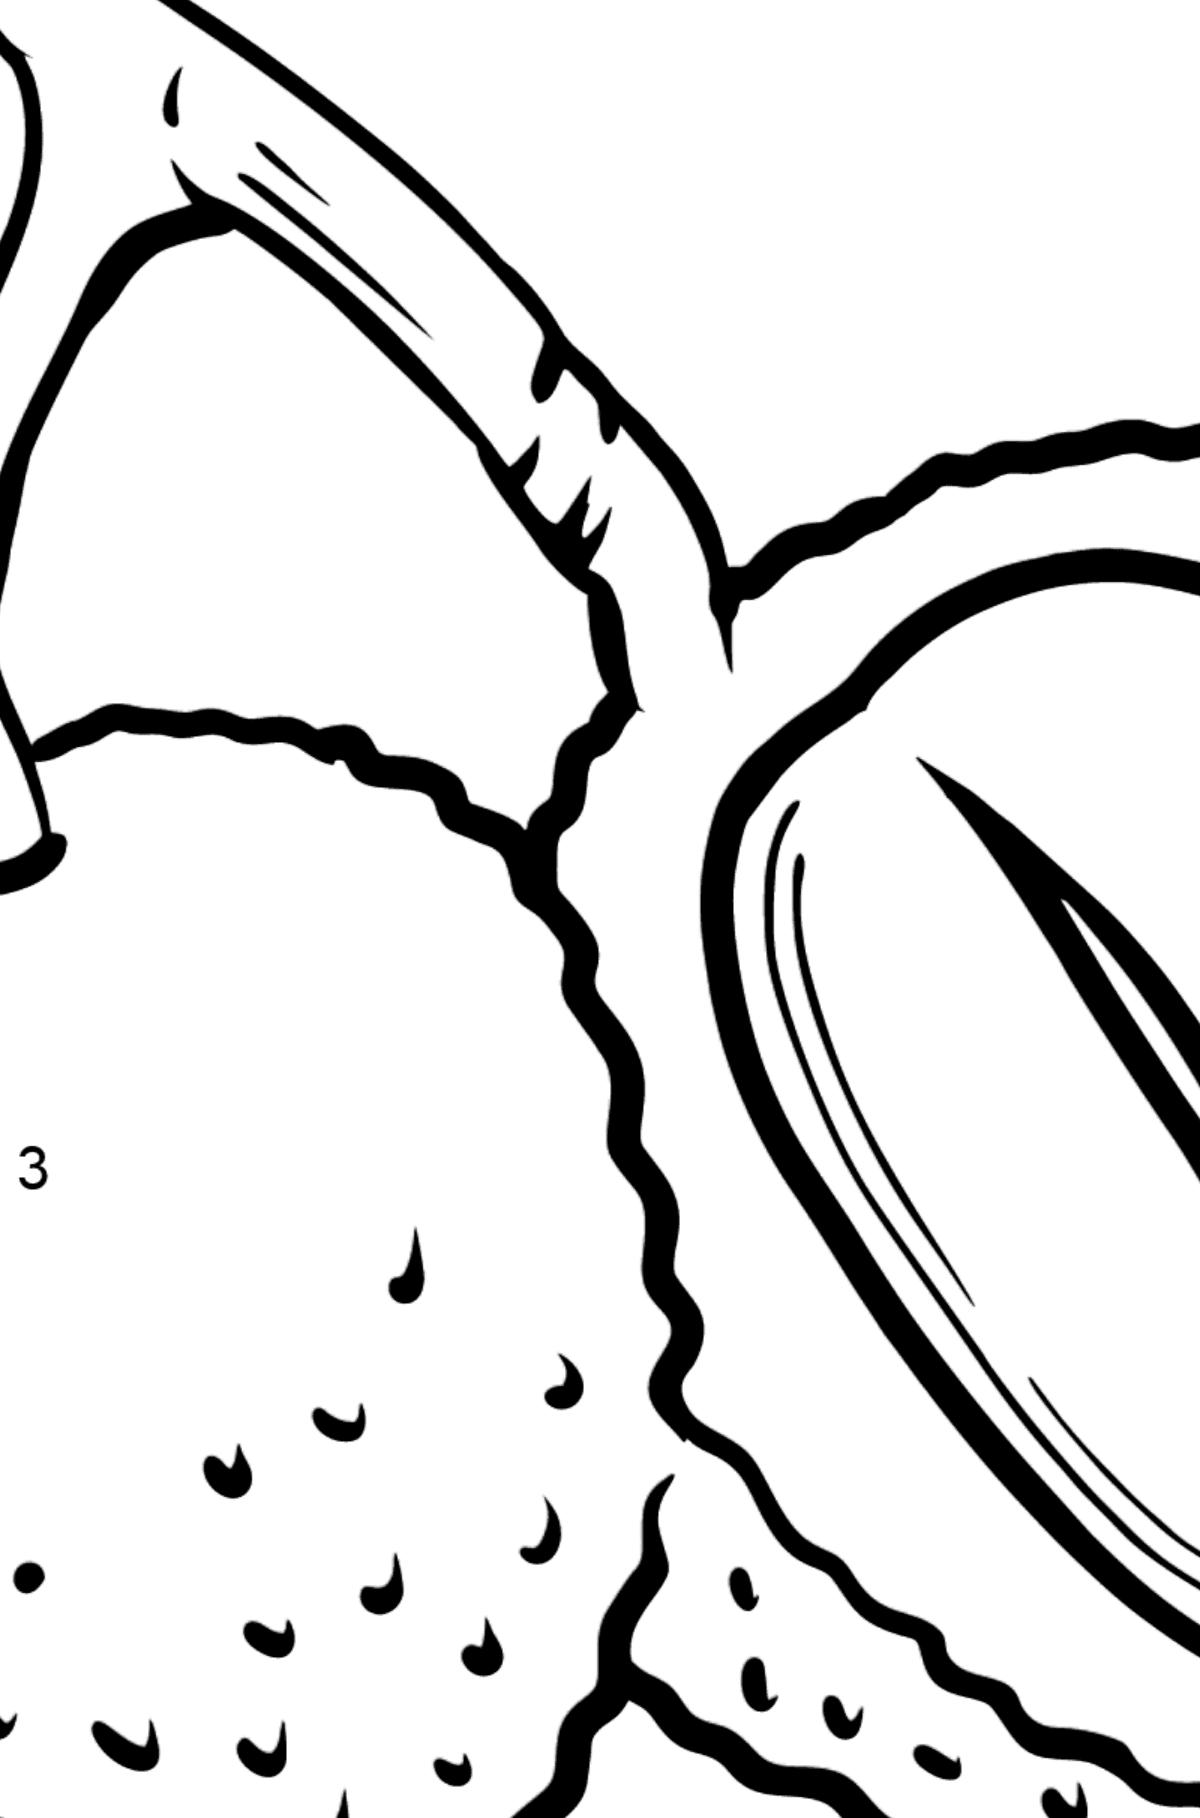 Durian coloring page - Coloring by Numbers for Kids